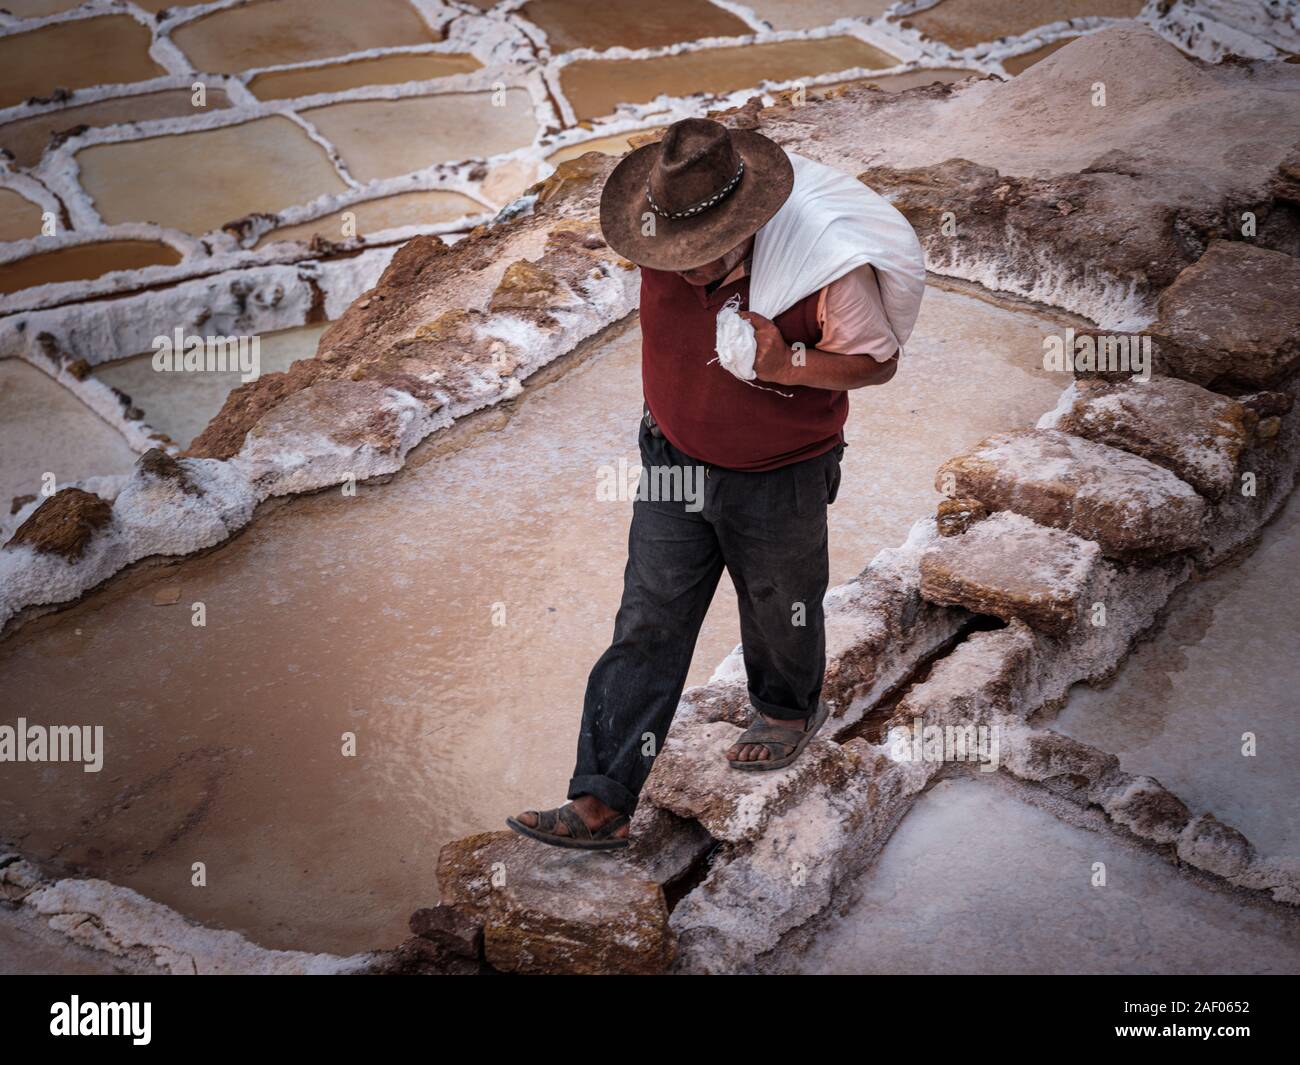 MARAS, PERU - CIRCA SEPTEMBER 2019:  Worker carrying a bags at the Marasal salt mines near the village of Maras in the Cusco region known as Sacred Va Stock Photo